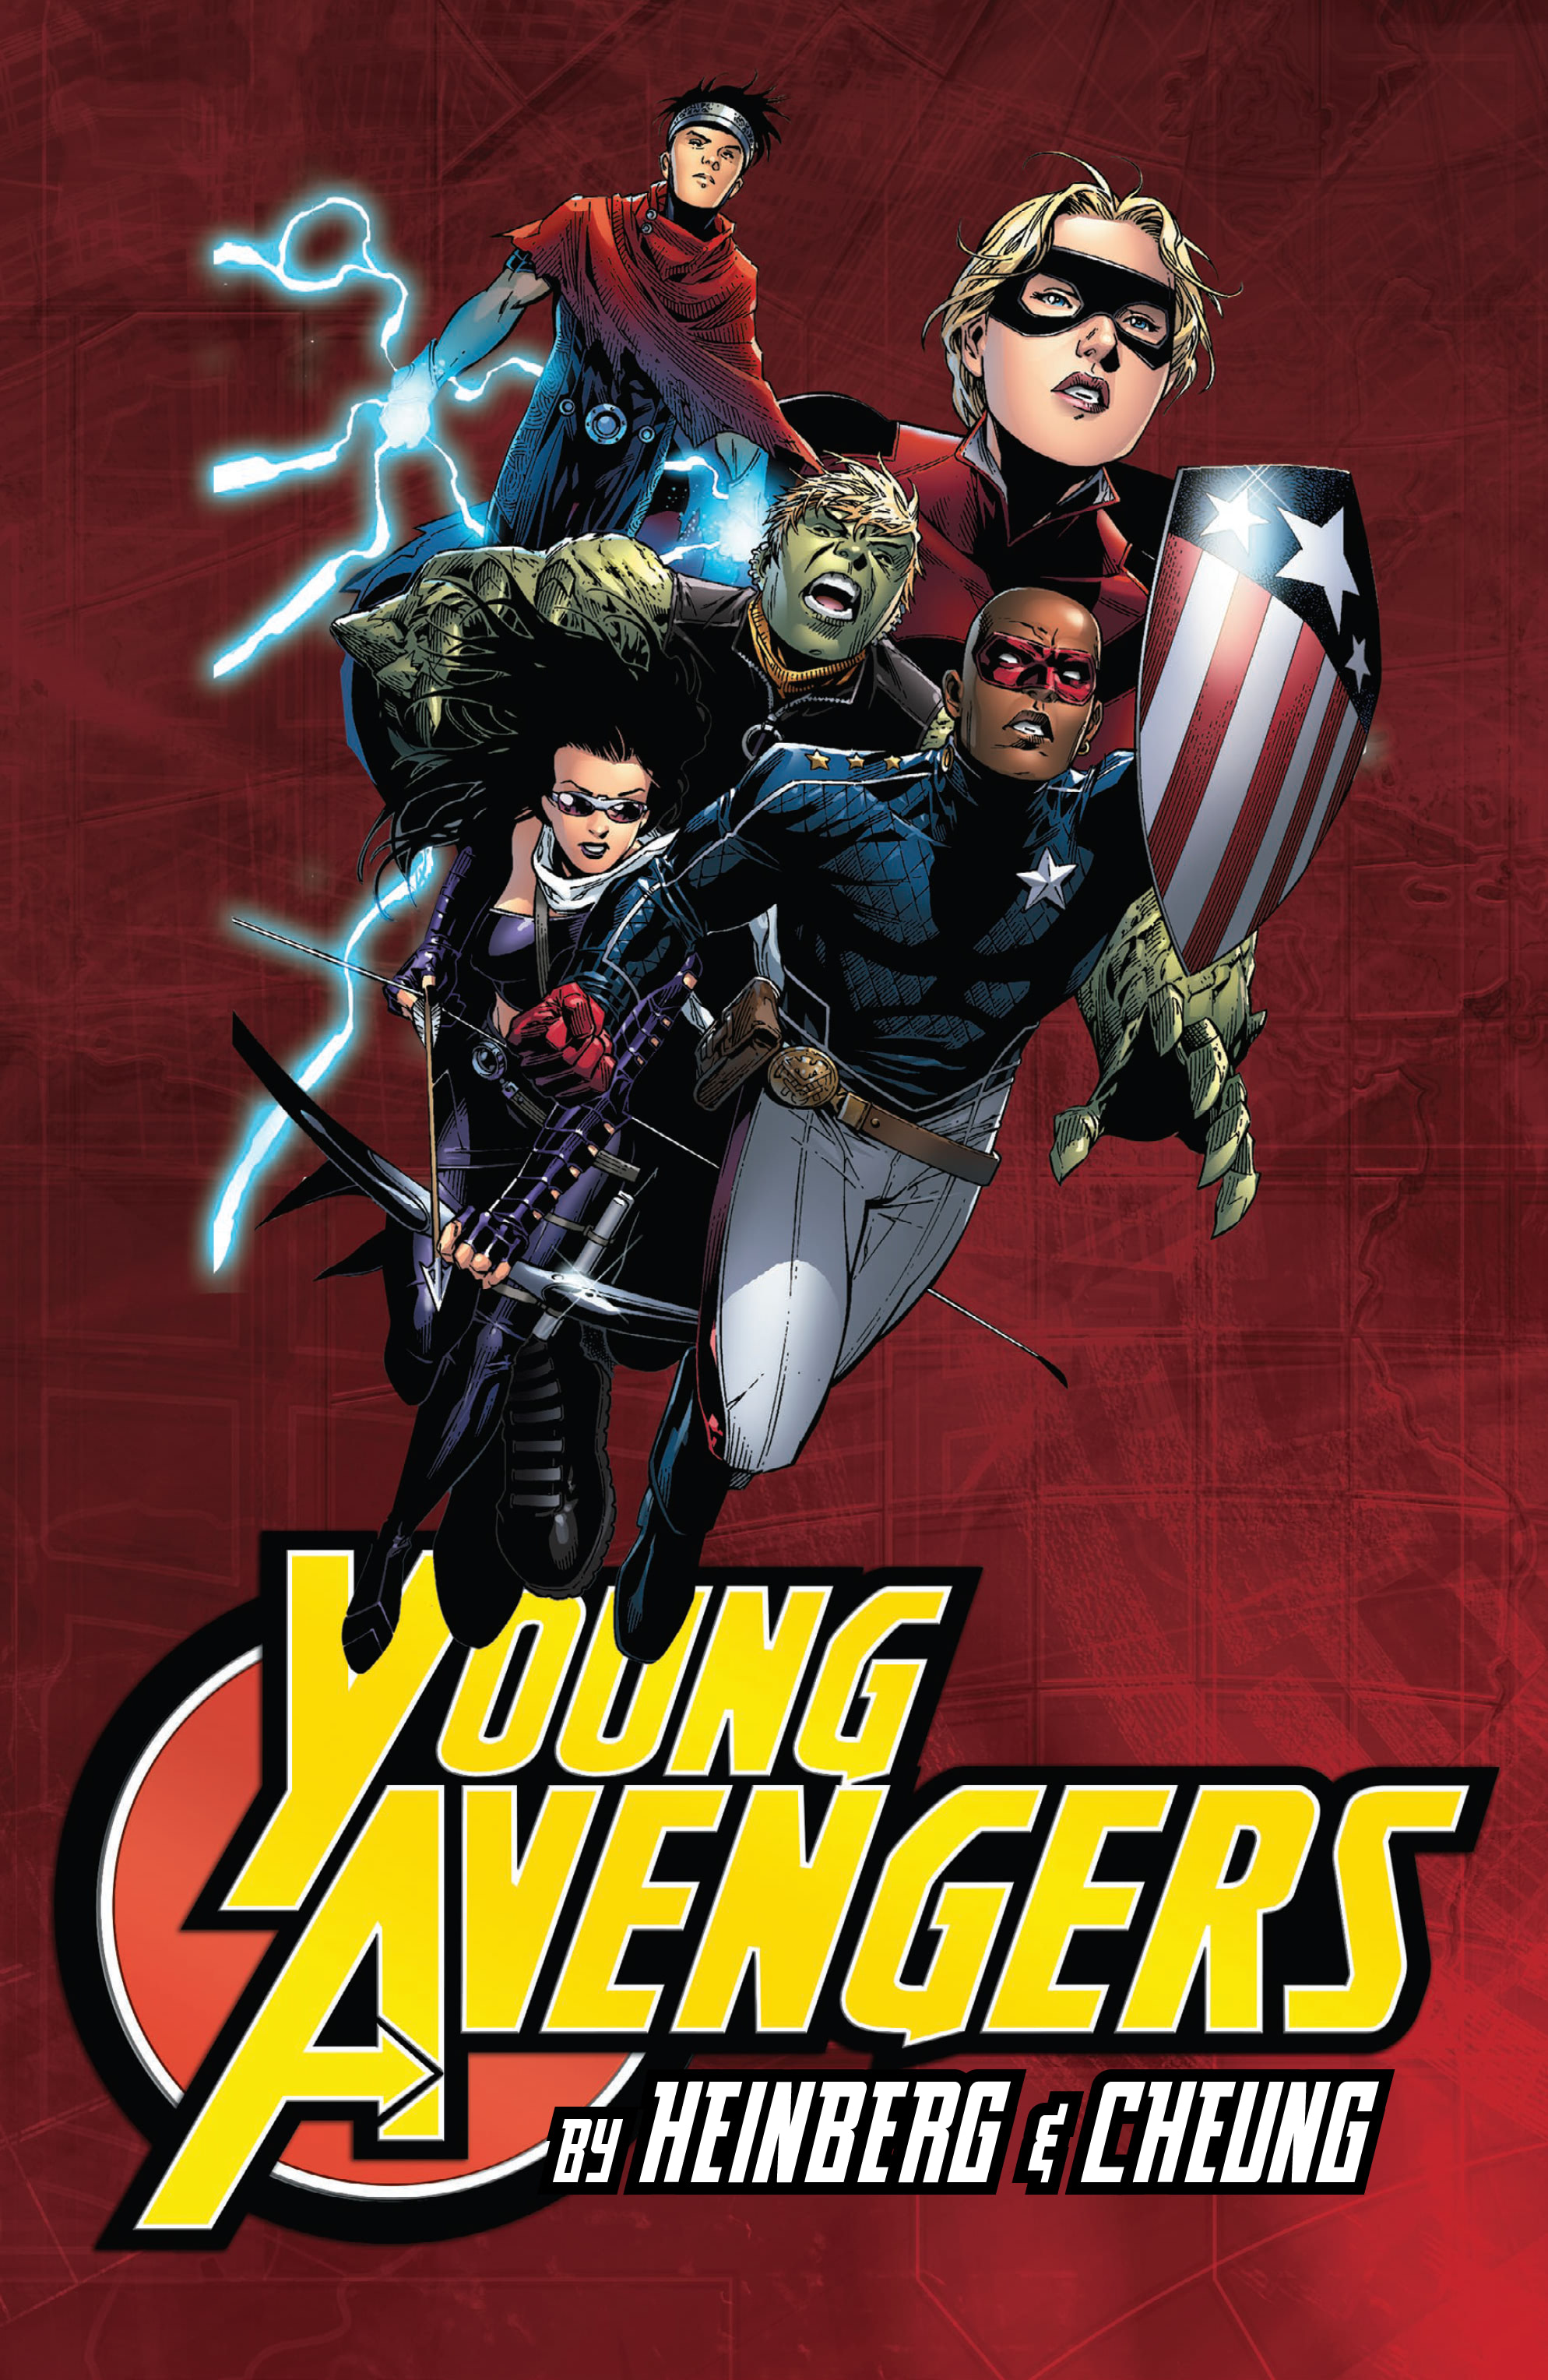 Read online Young Avengers by Heinberg & Cheung Omnibus comic -  Issue # TPB (Part 1) - 2